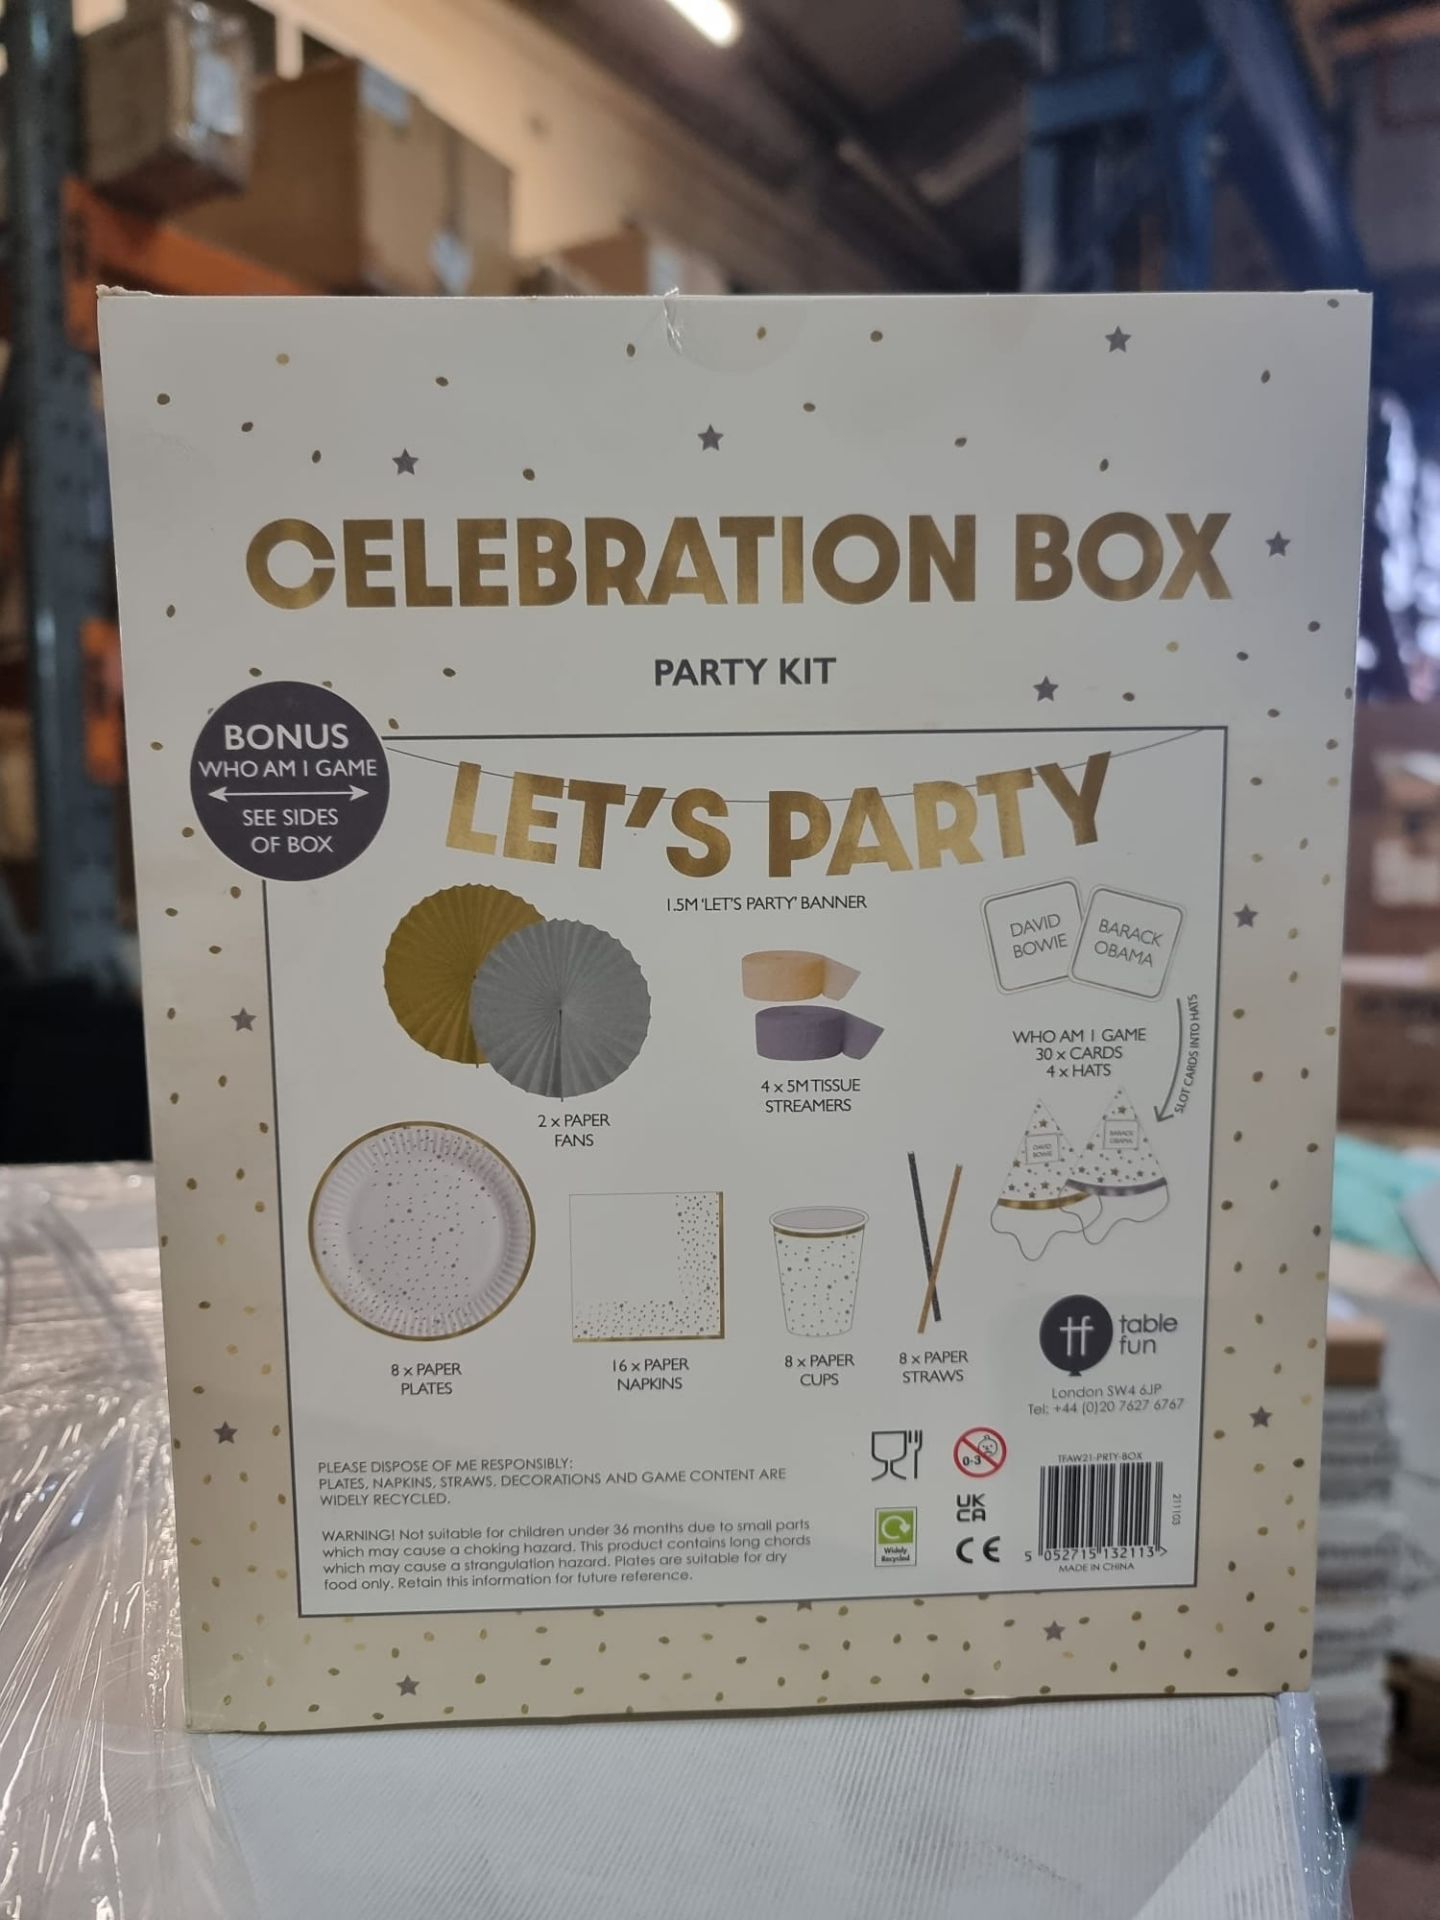 10 x NEW 81 PIECE CELEBRATION BOXES FOR 8 GUESTS. INCLUDES: PLATES, NAPKINS, STRAWS, CUPS, - Image 2 of 2